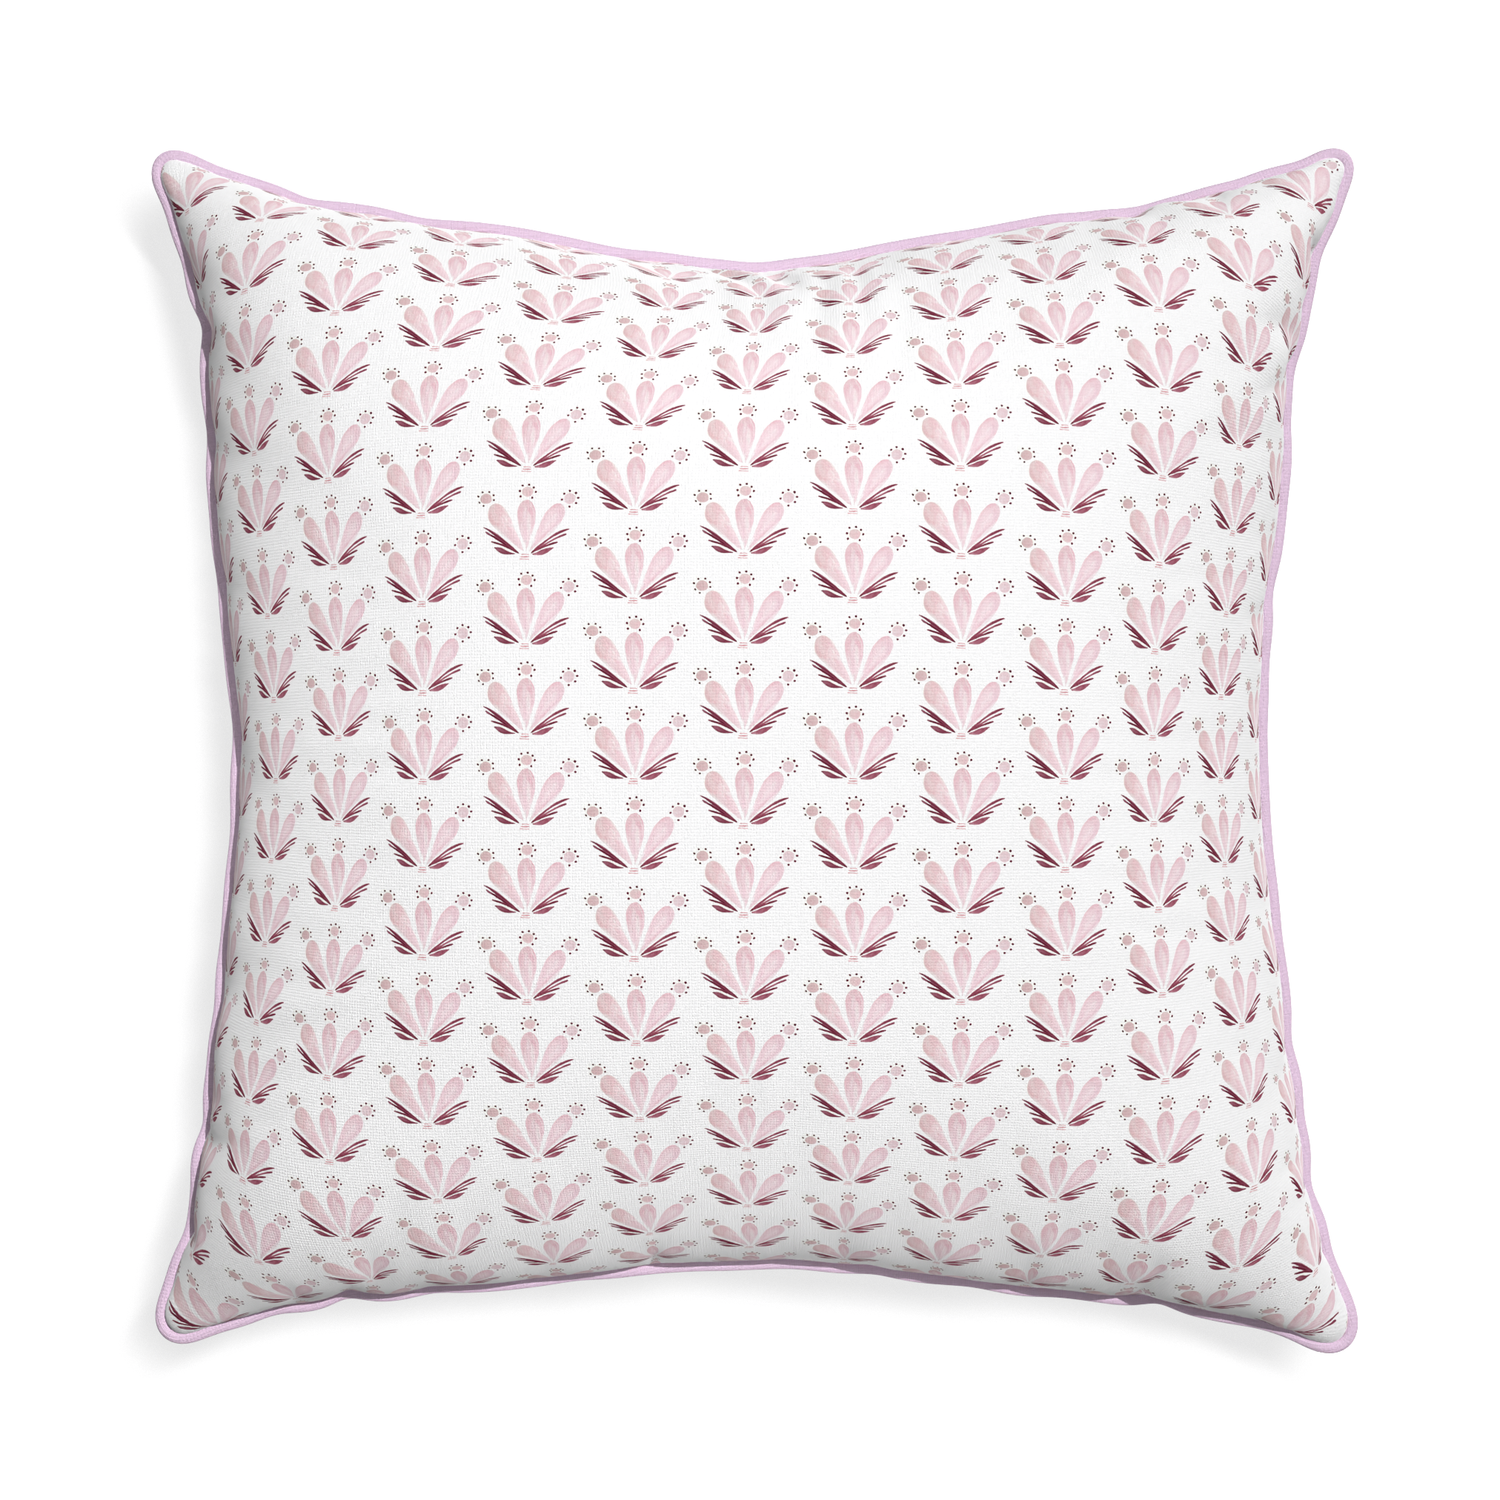 Euro-sham serena pink custom pillow with l piping on white background